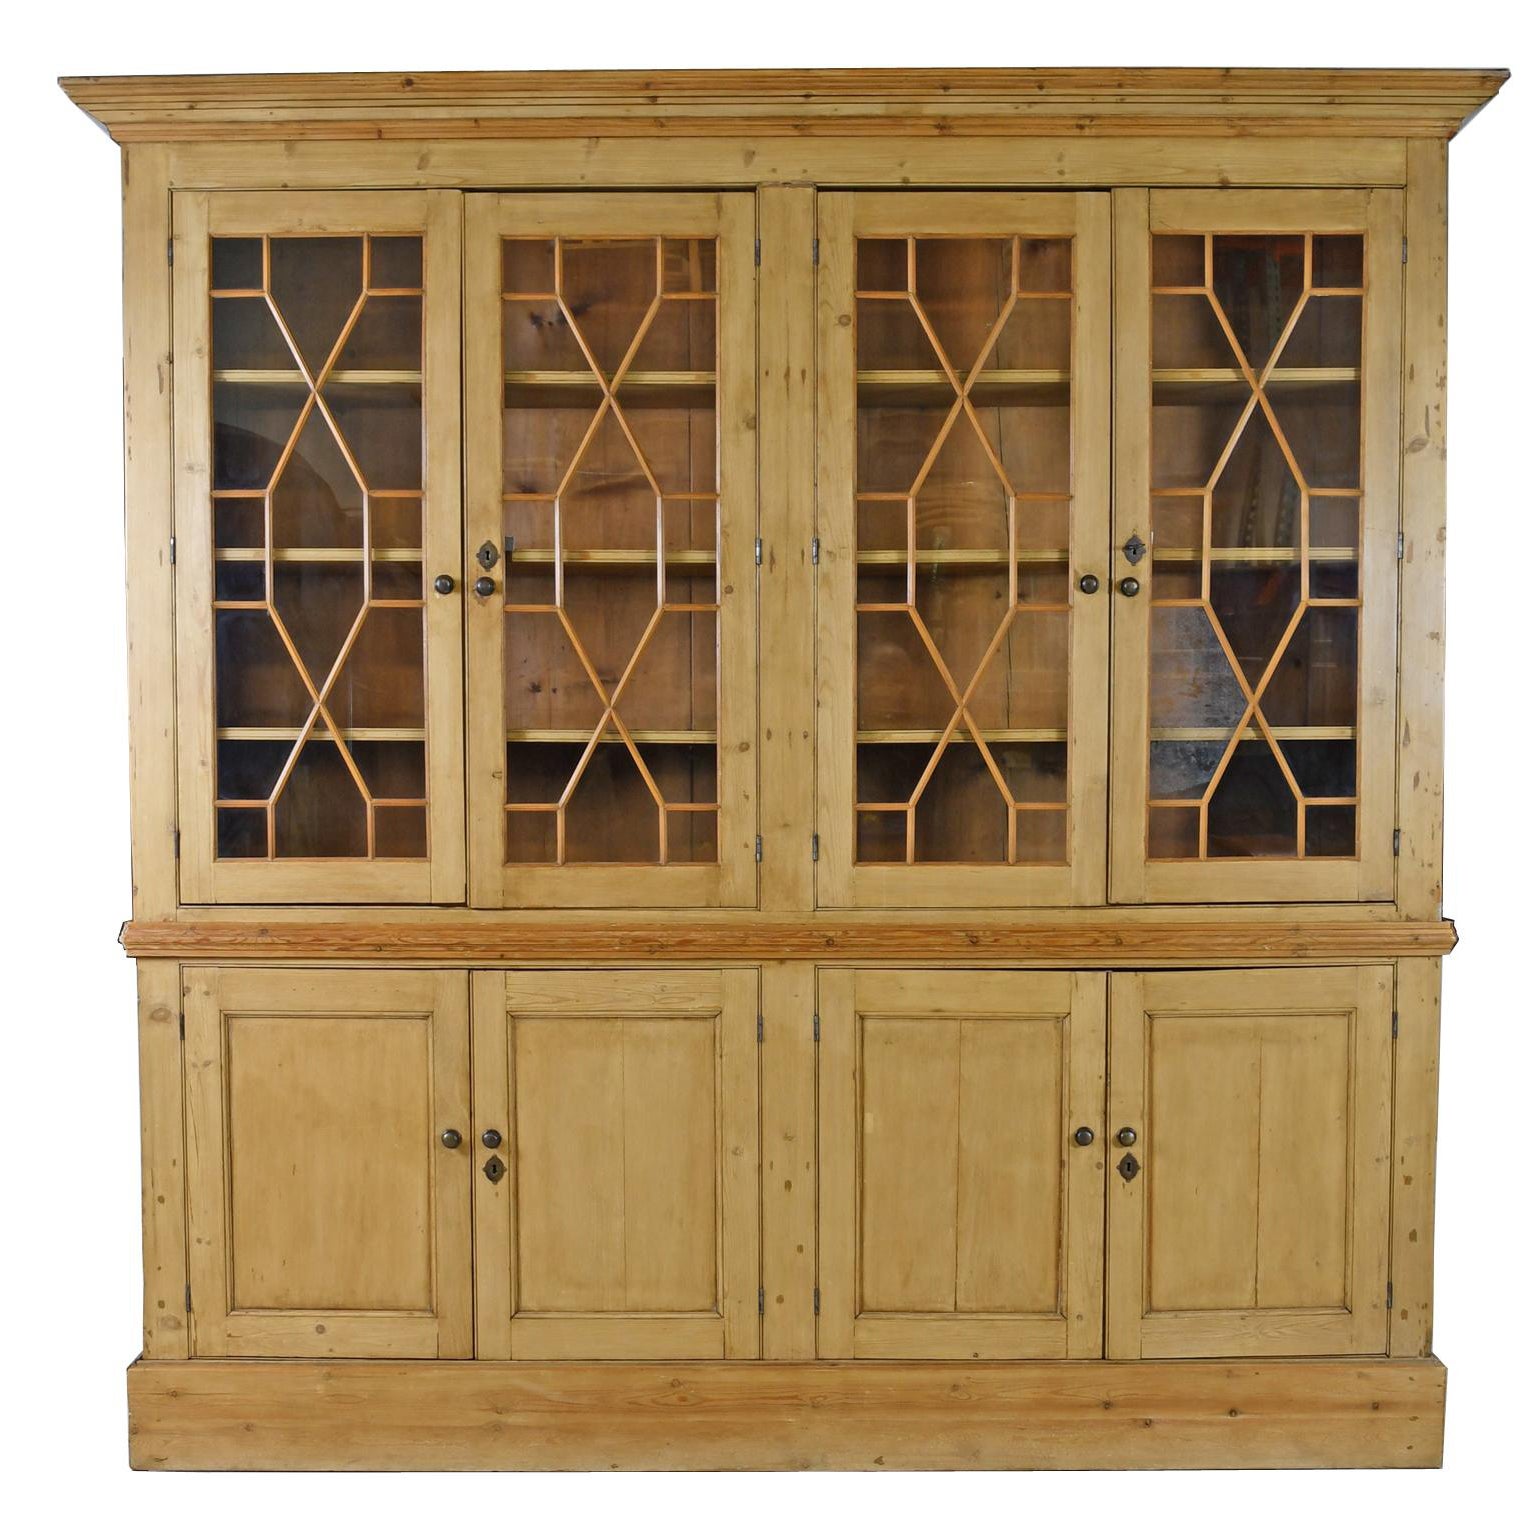 Large Georgian Style English Pine Bookcase/Display Cabinet, c. 1890 and later